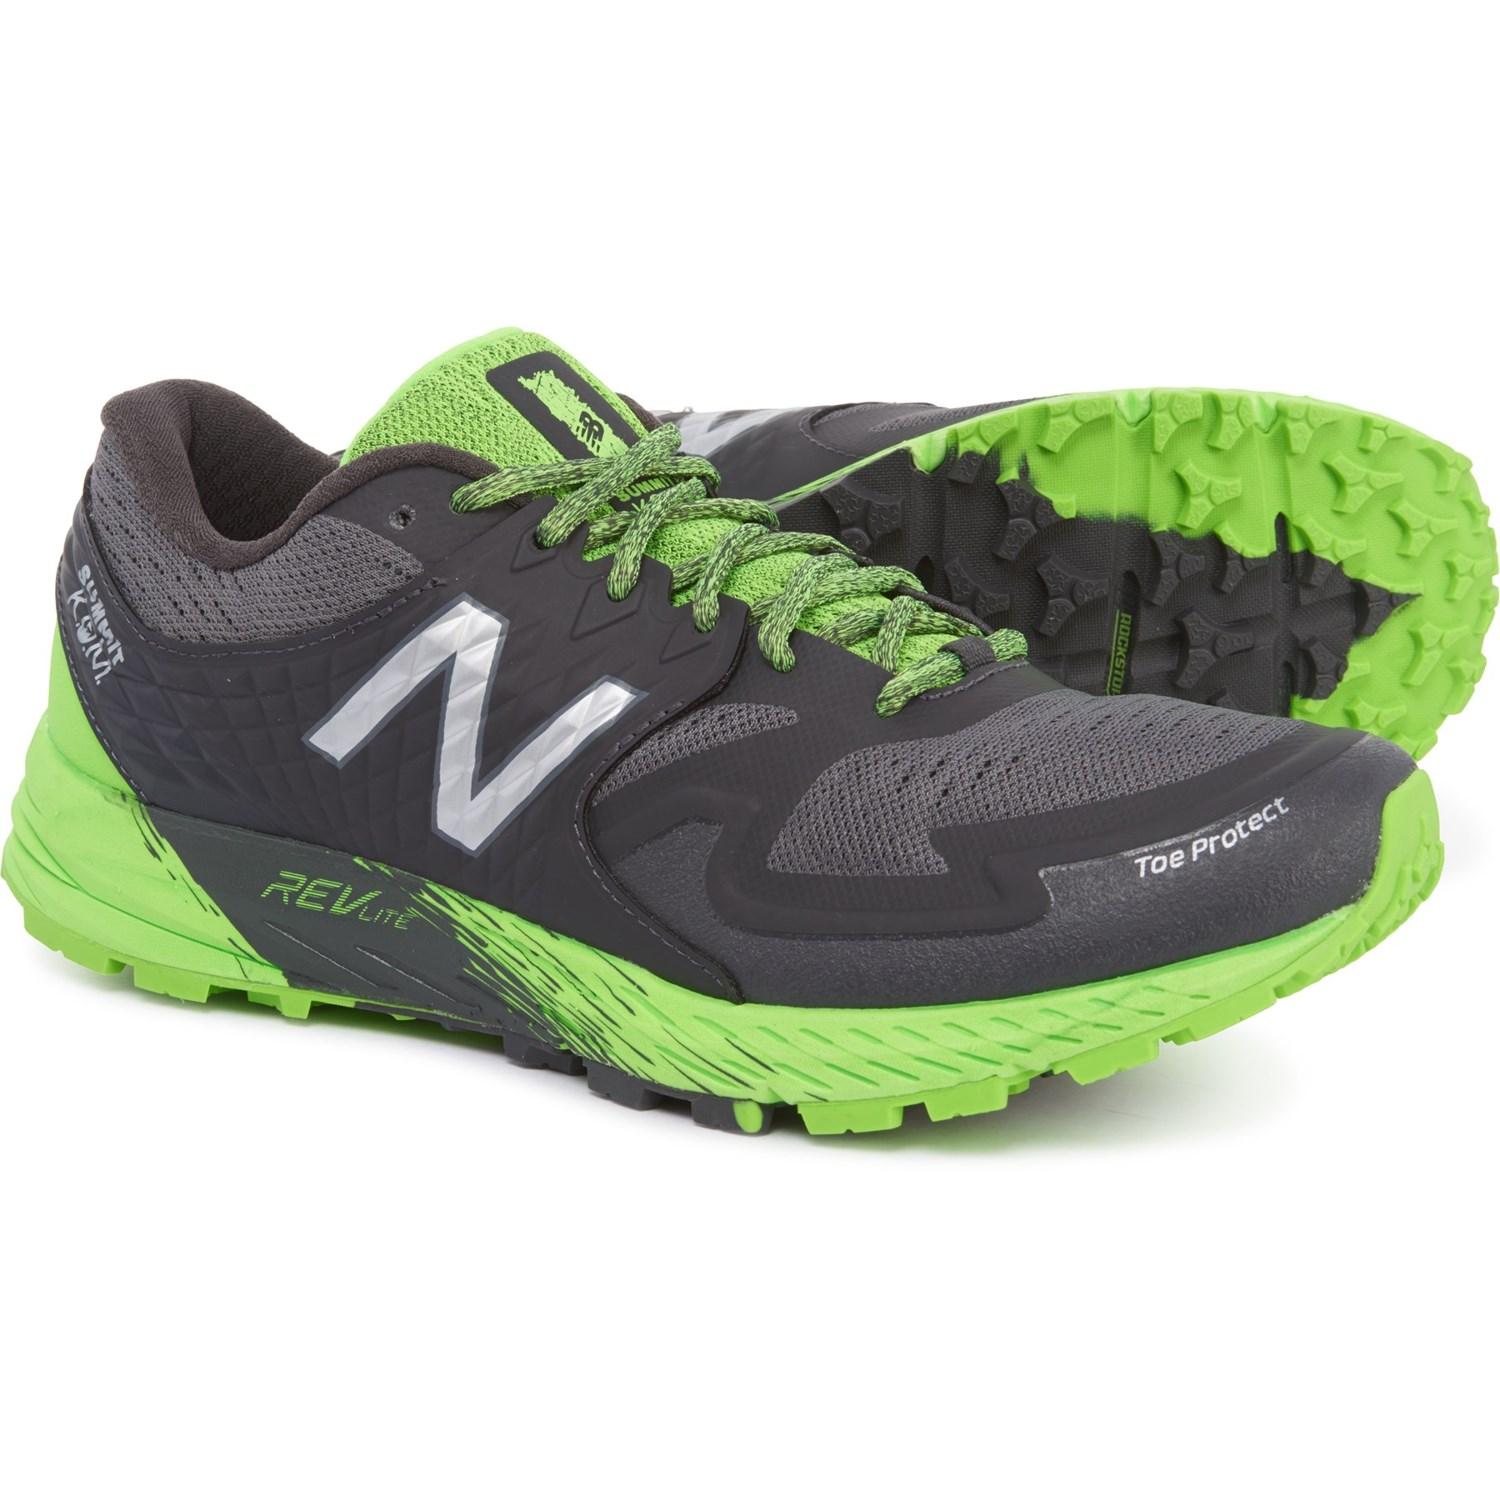 New Balance Summit Kom Trail Running Shoes in Green for Men - Lyst